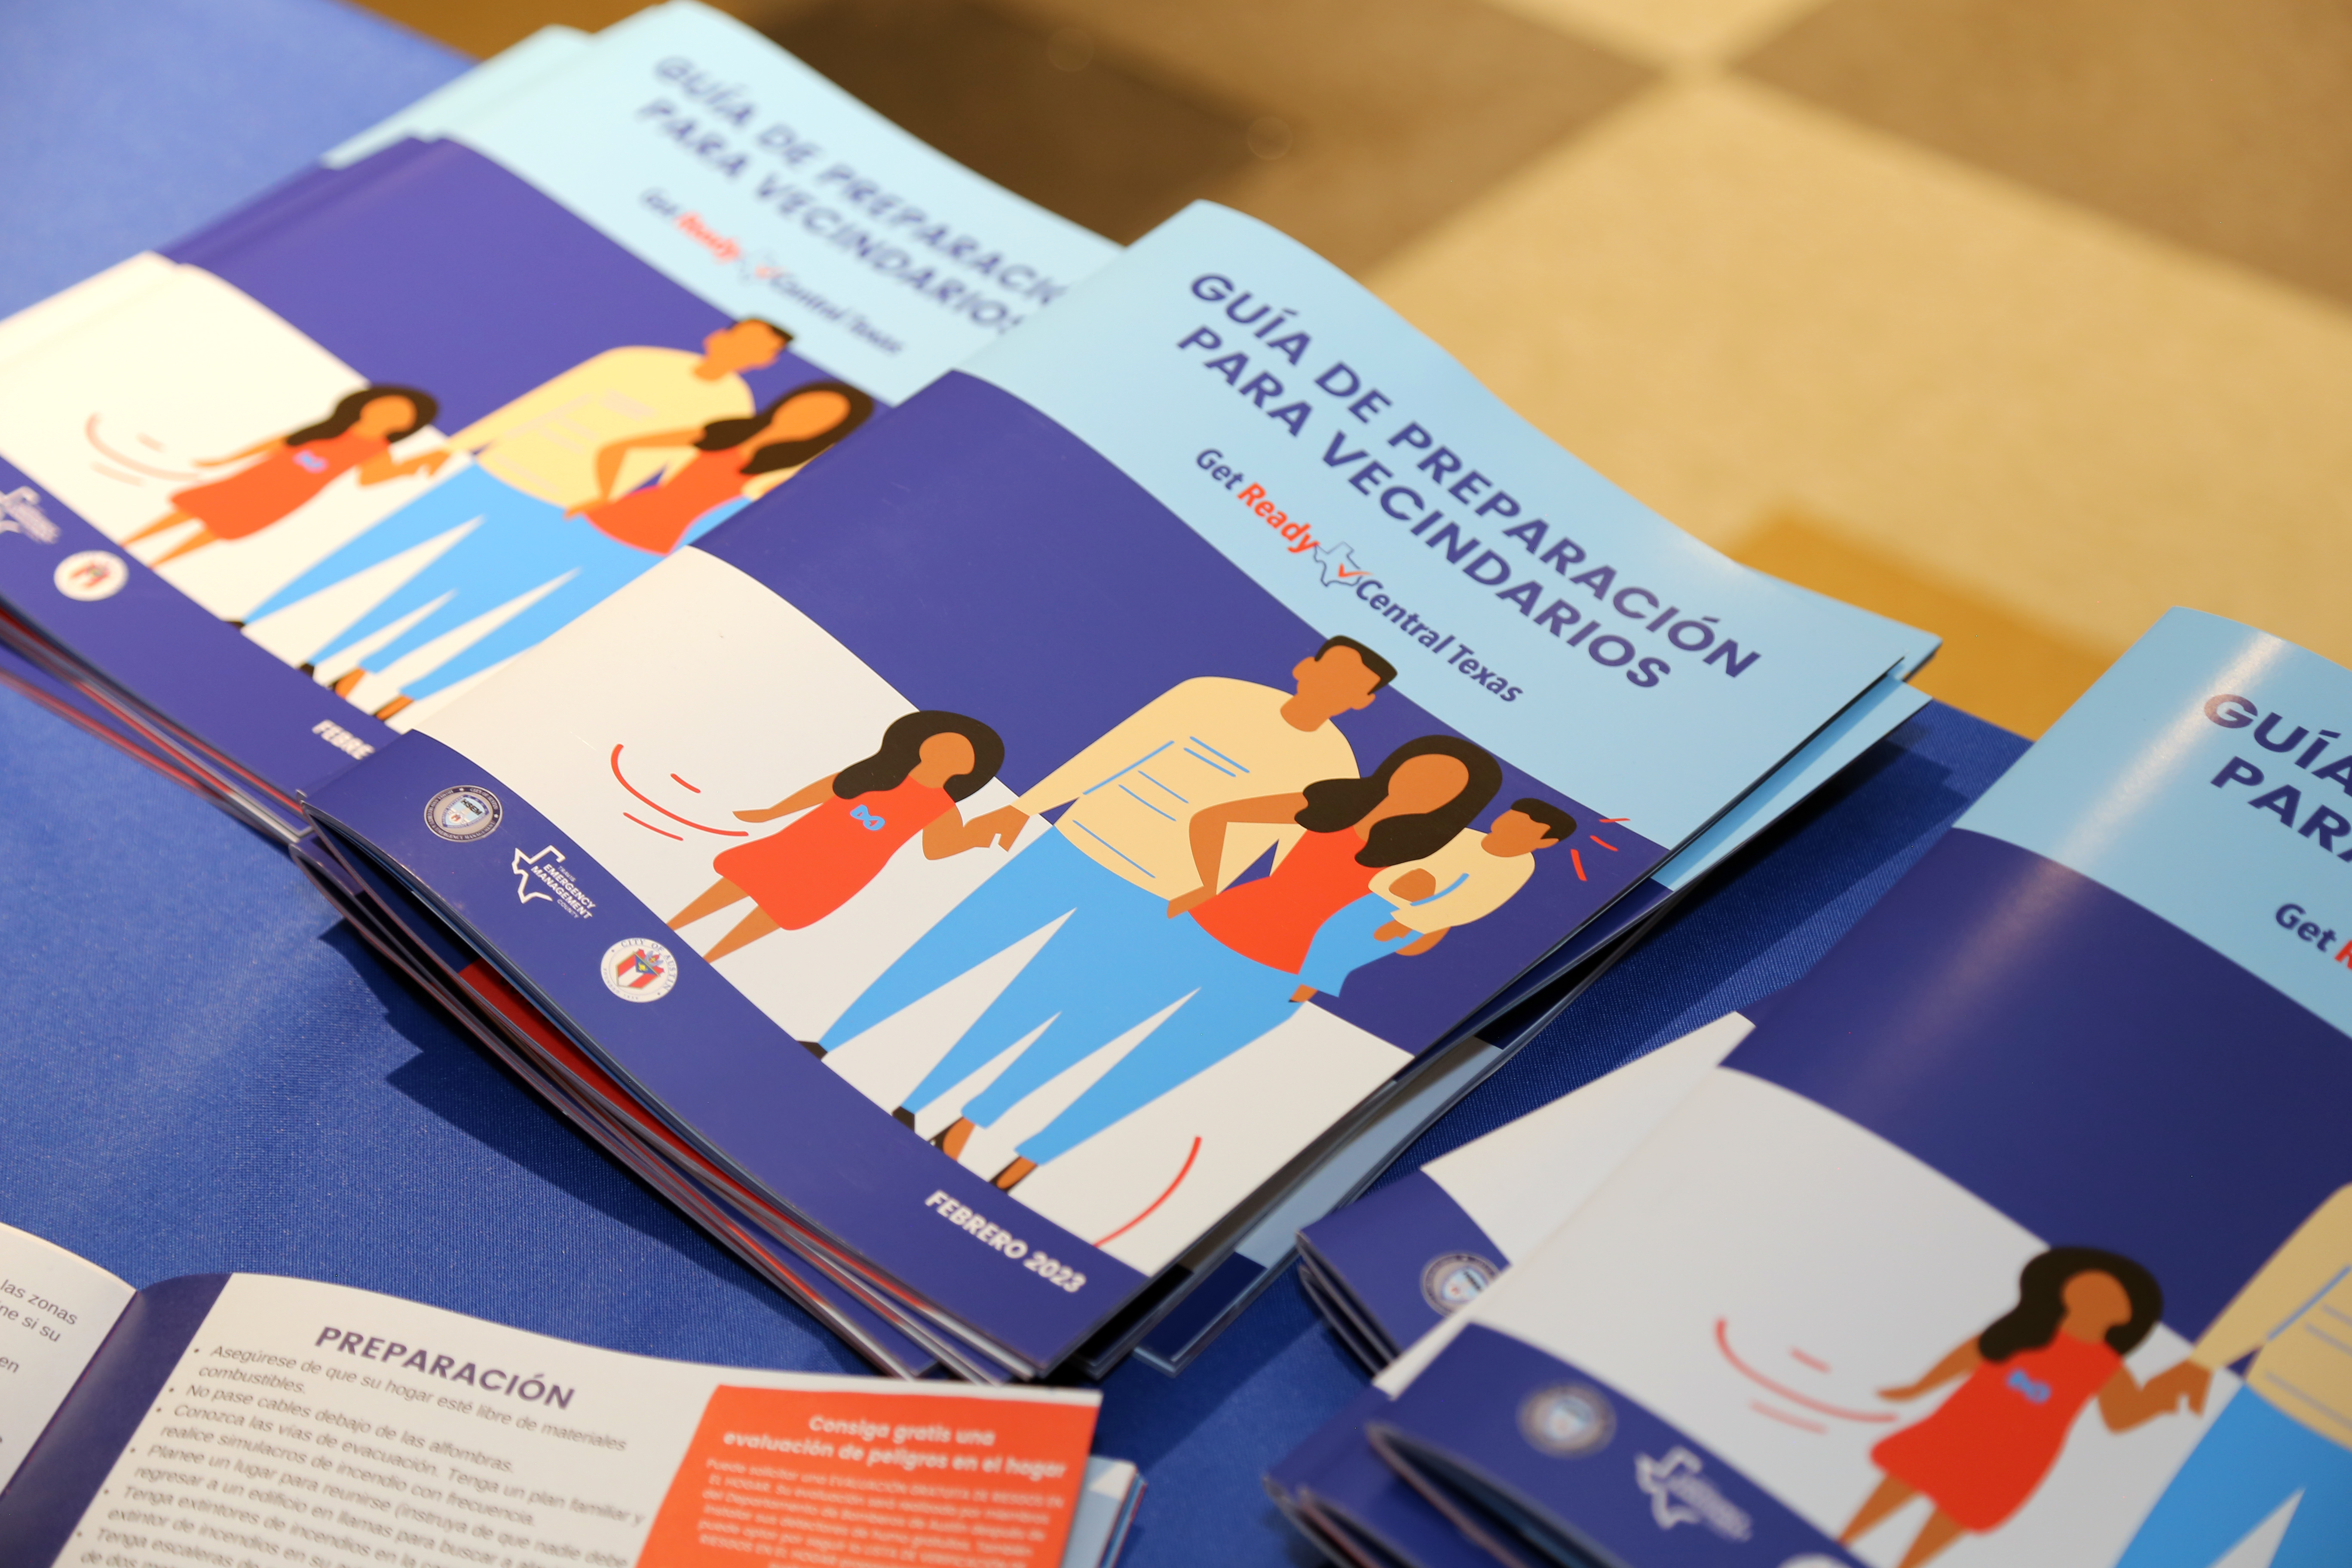 Stacks of Spanish edition of Neighborhood Preparedness Guide on a table